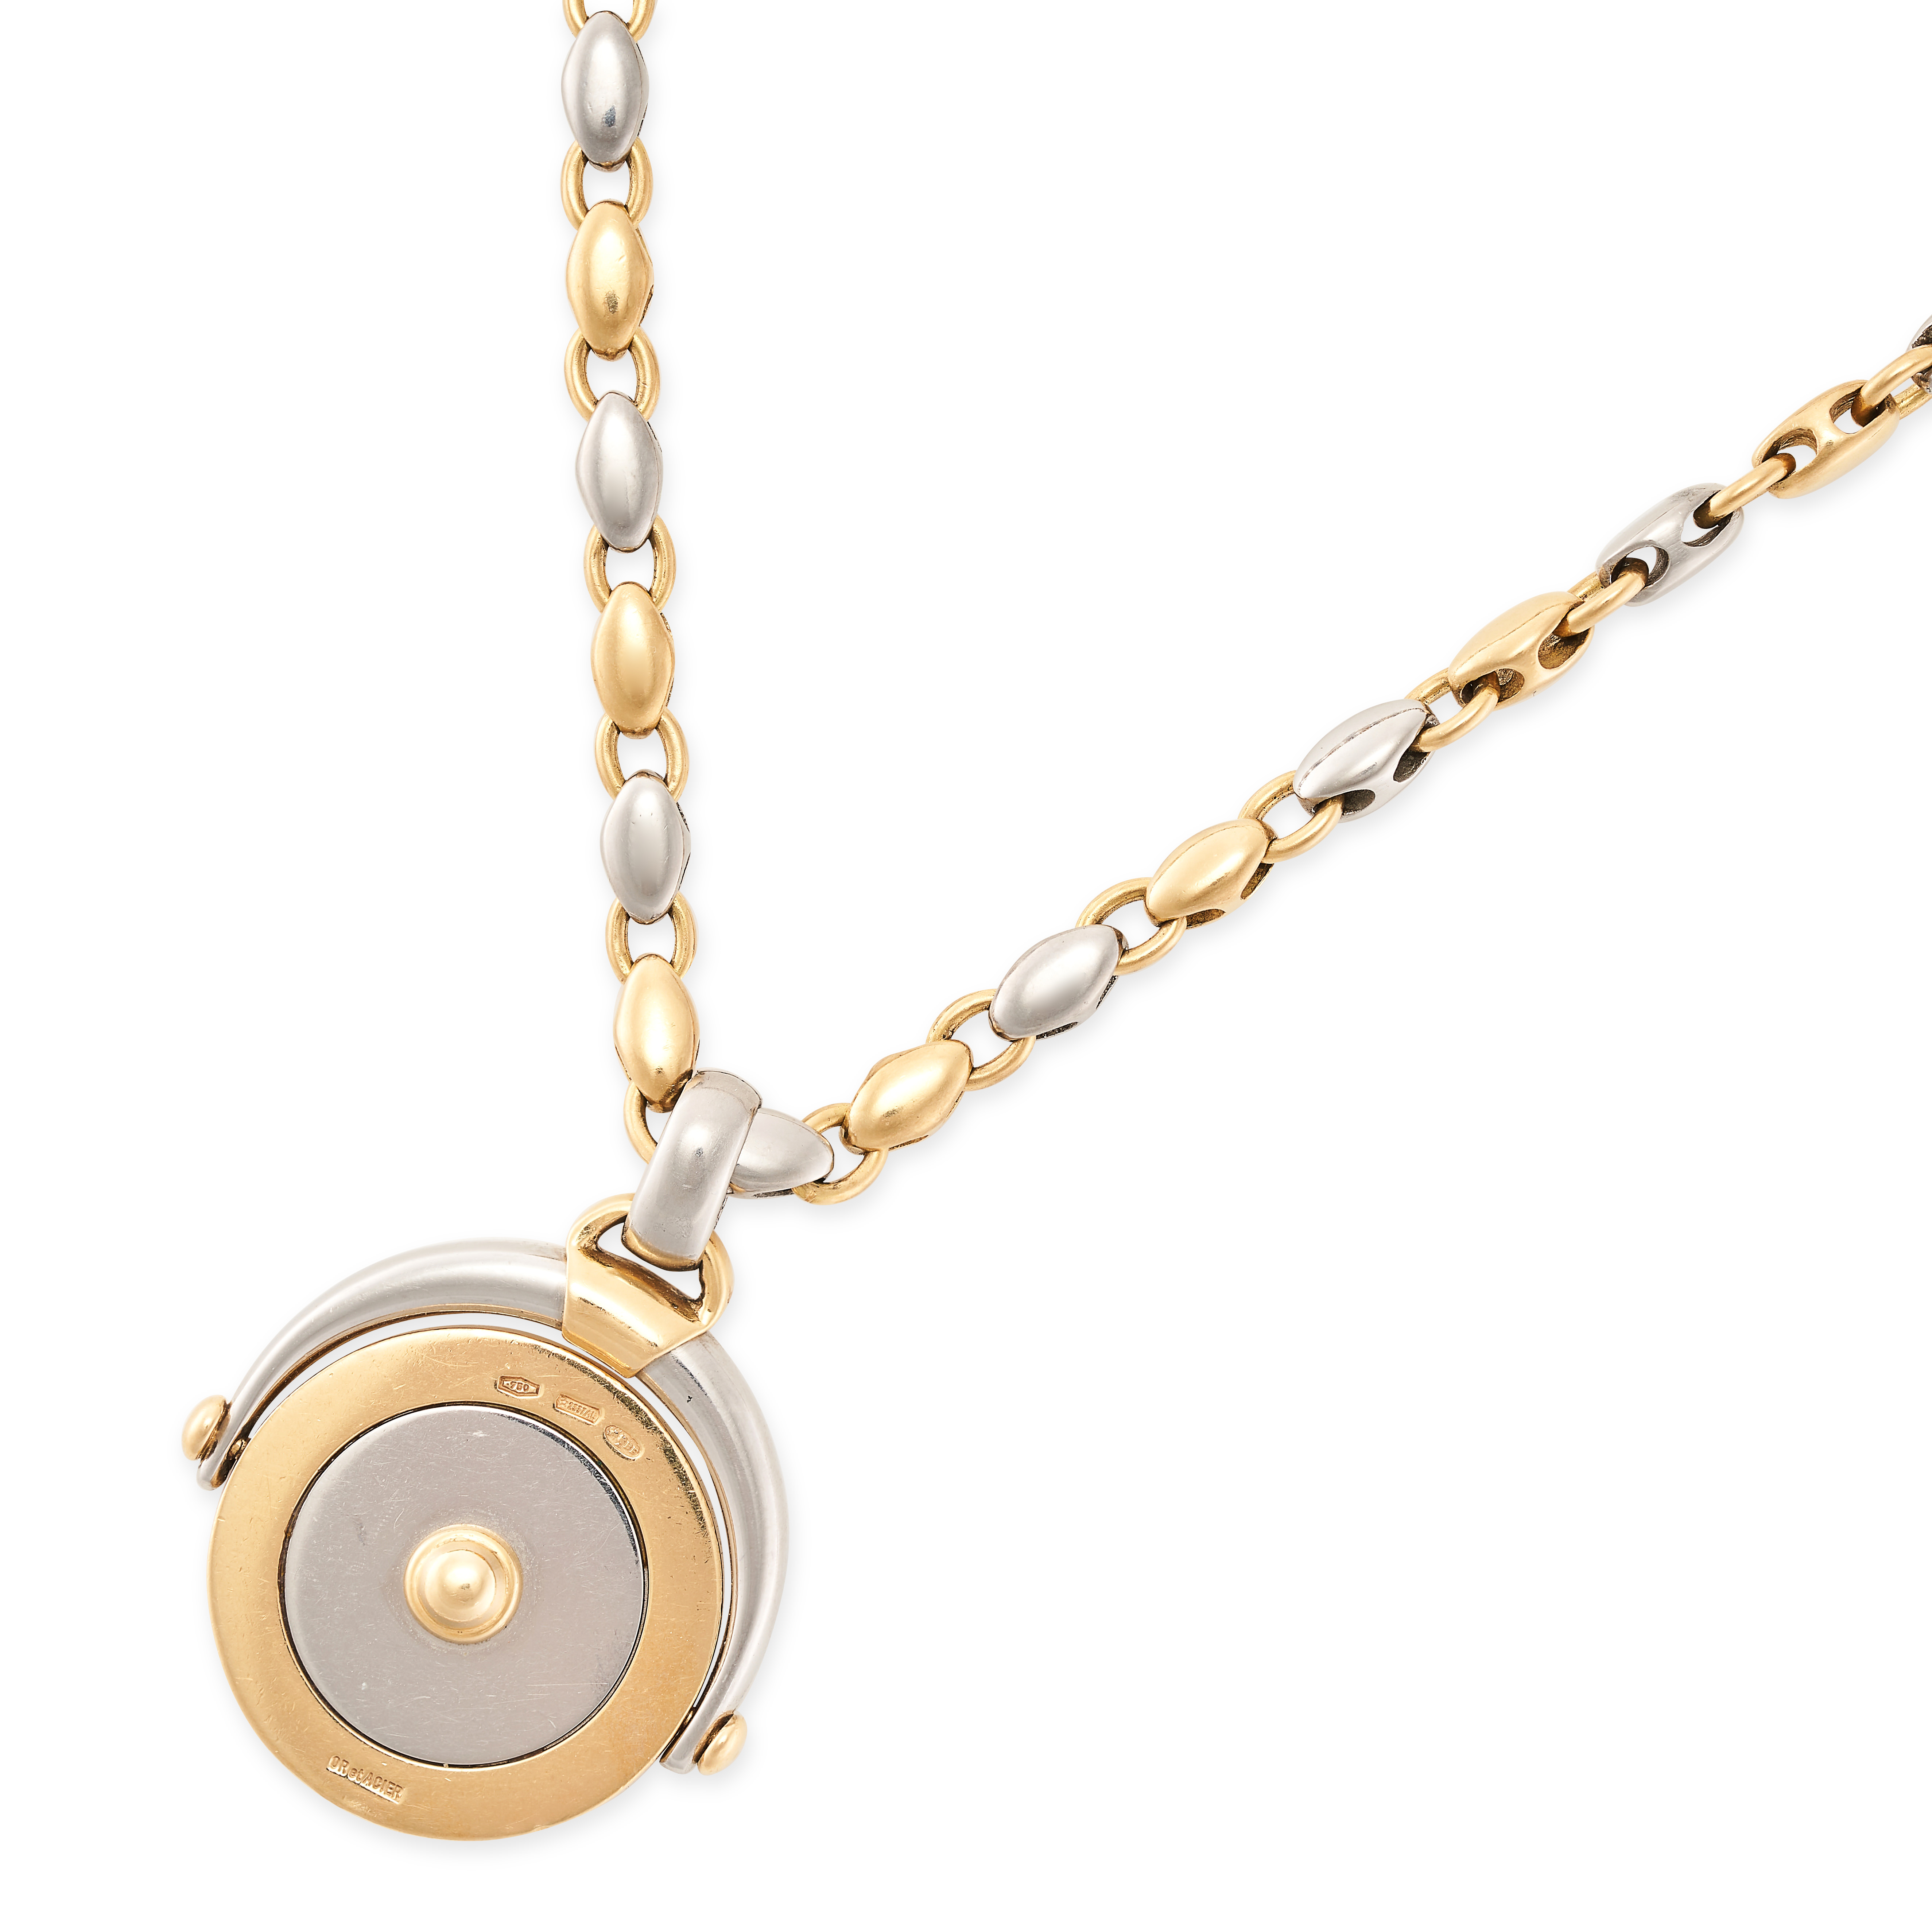 BVLGARI, A TAURUS ZODIAC COIN PENDANT NECKLACE in 18ct yellow gold and steel, comprising a - Image 2 of 2